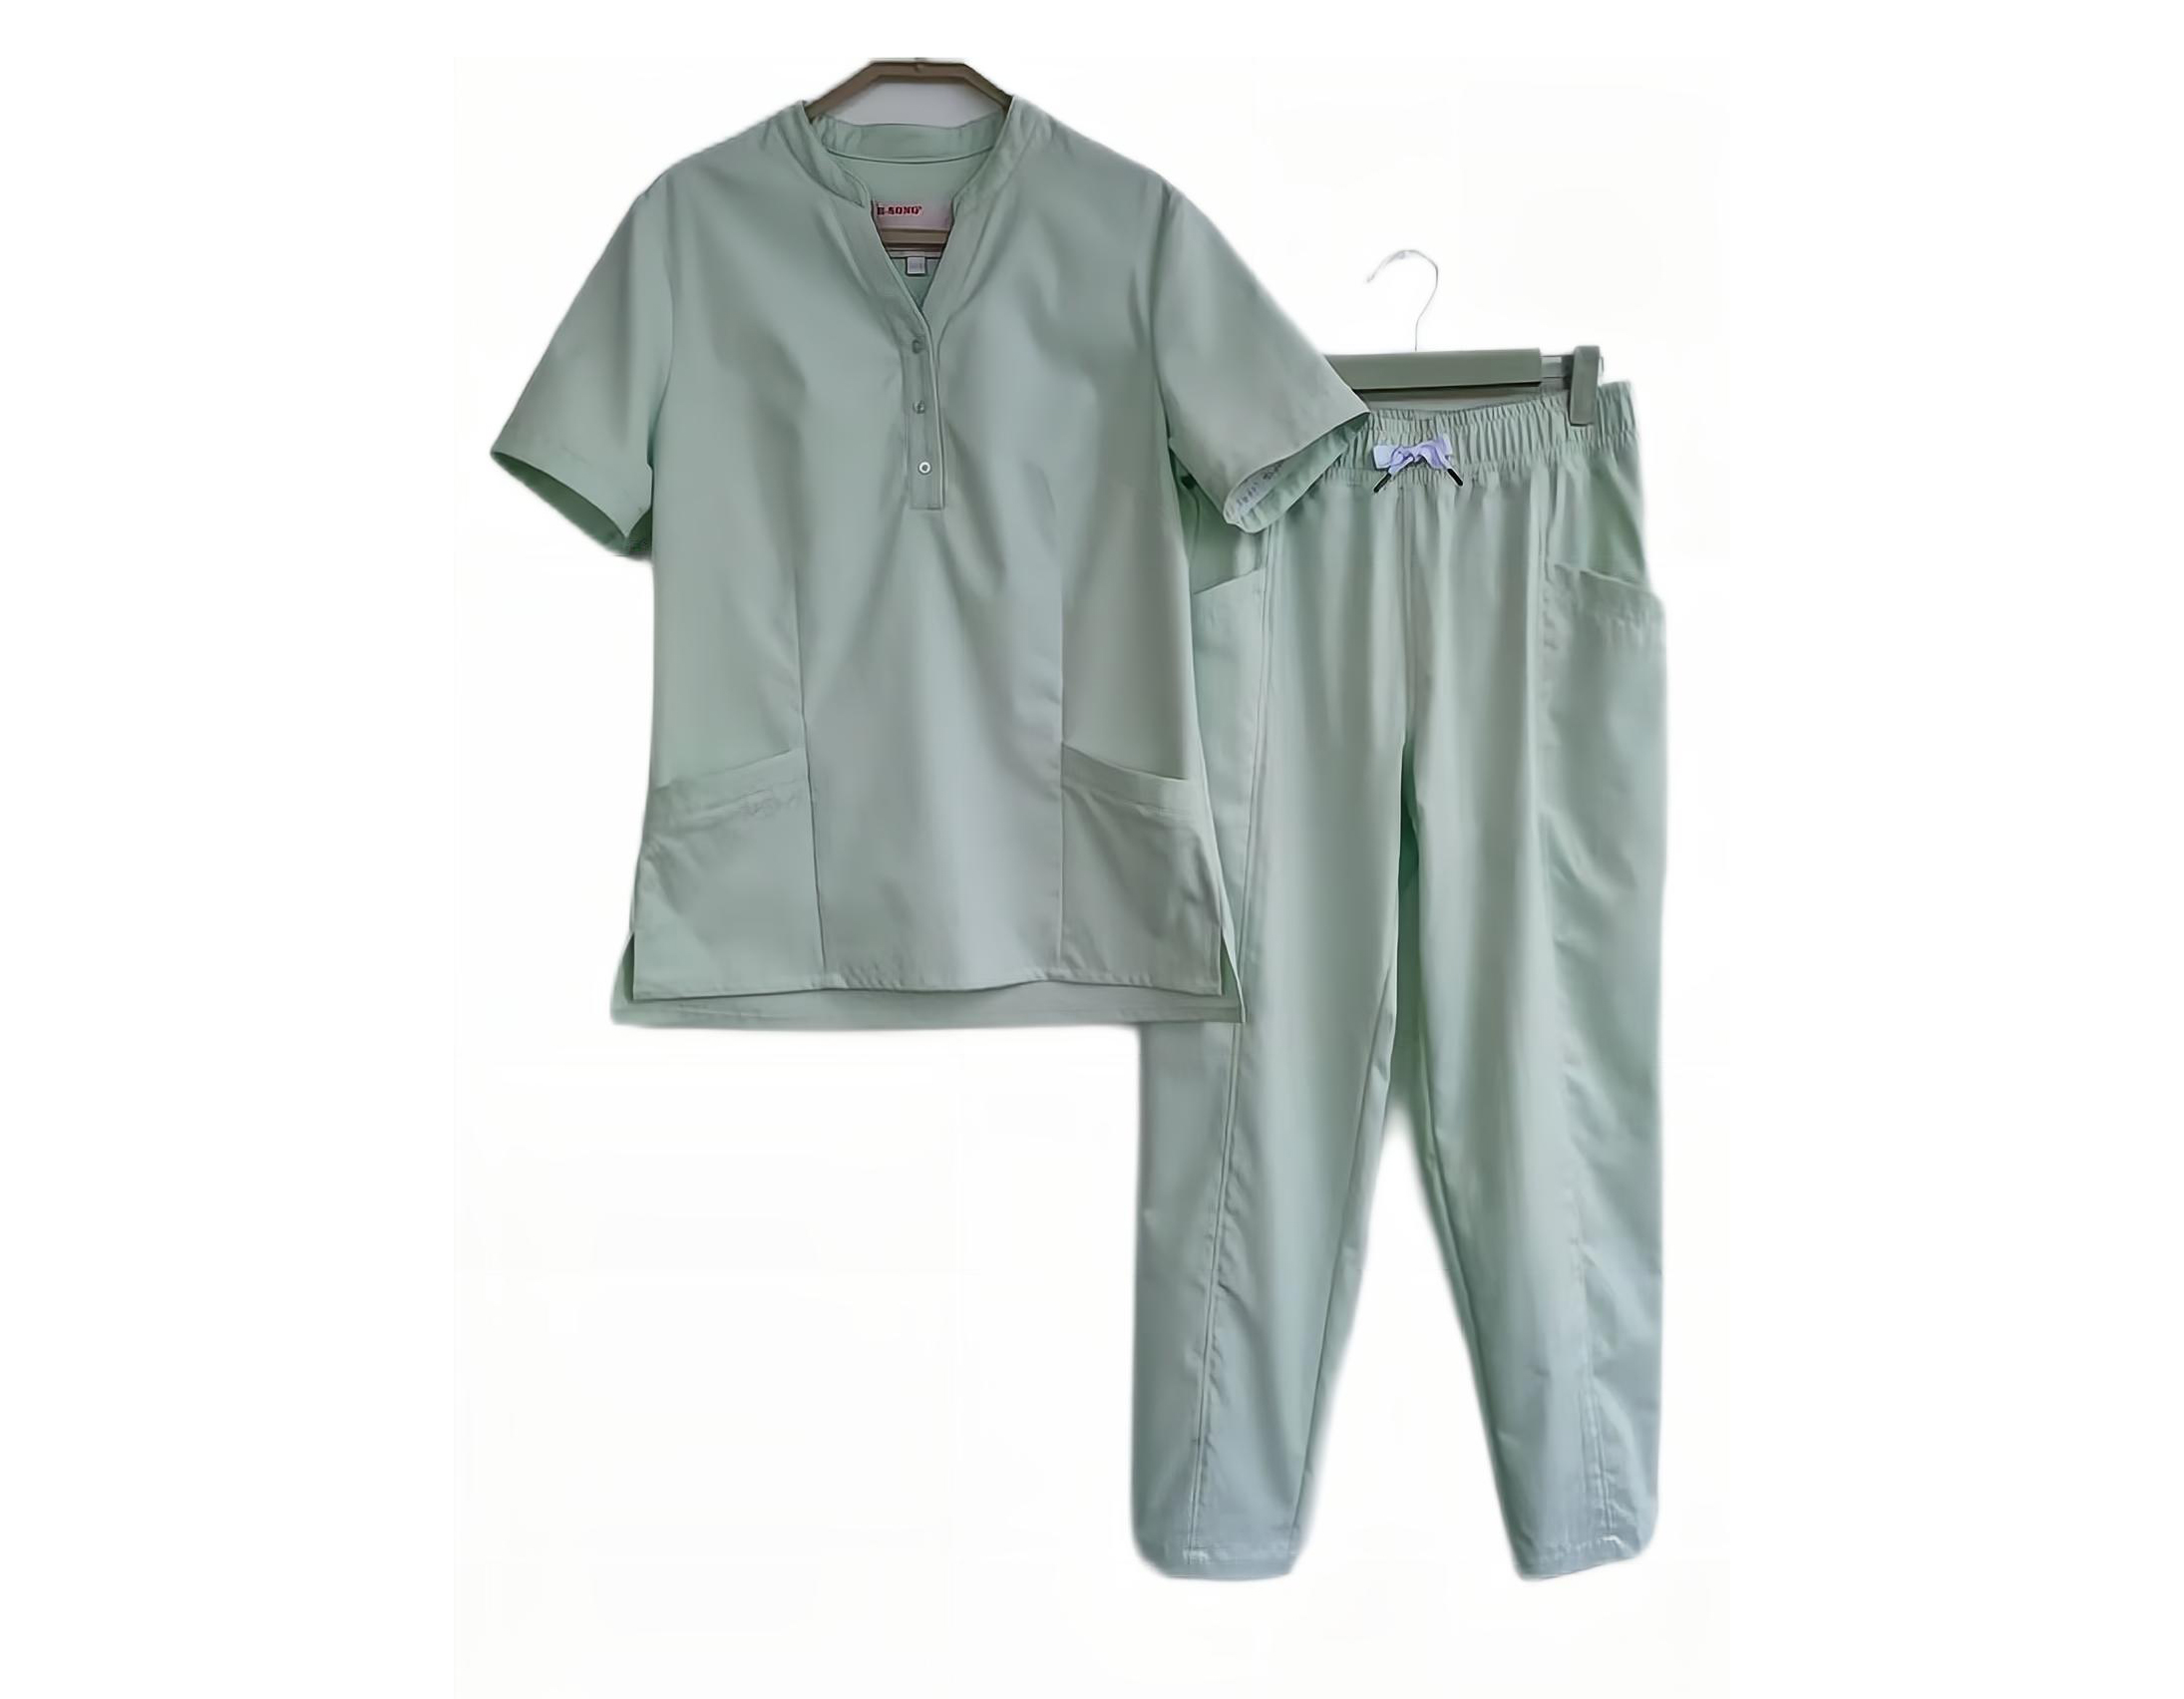 Nurse Fashion Scrub Suit V-Neck Tunick with Stand Collar in 4- Way Stretch Fabric